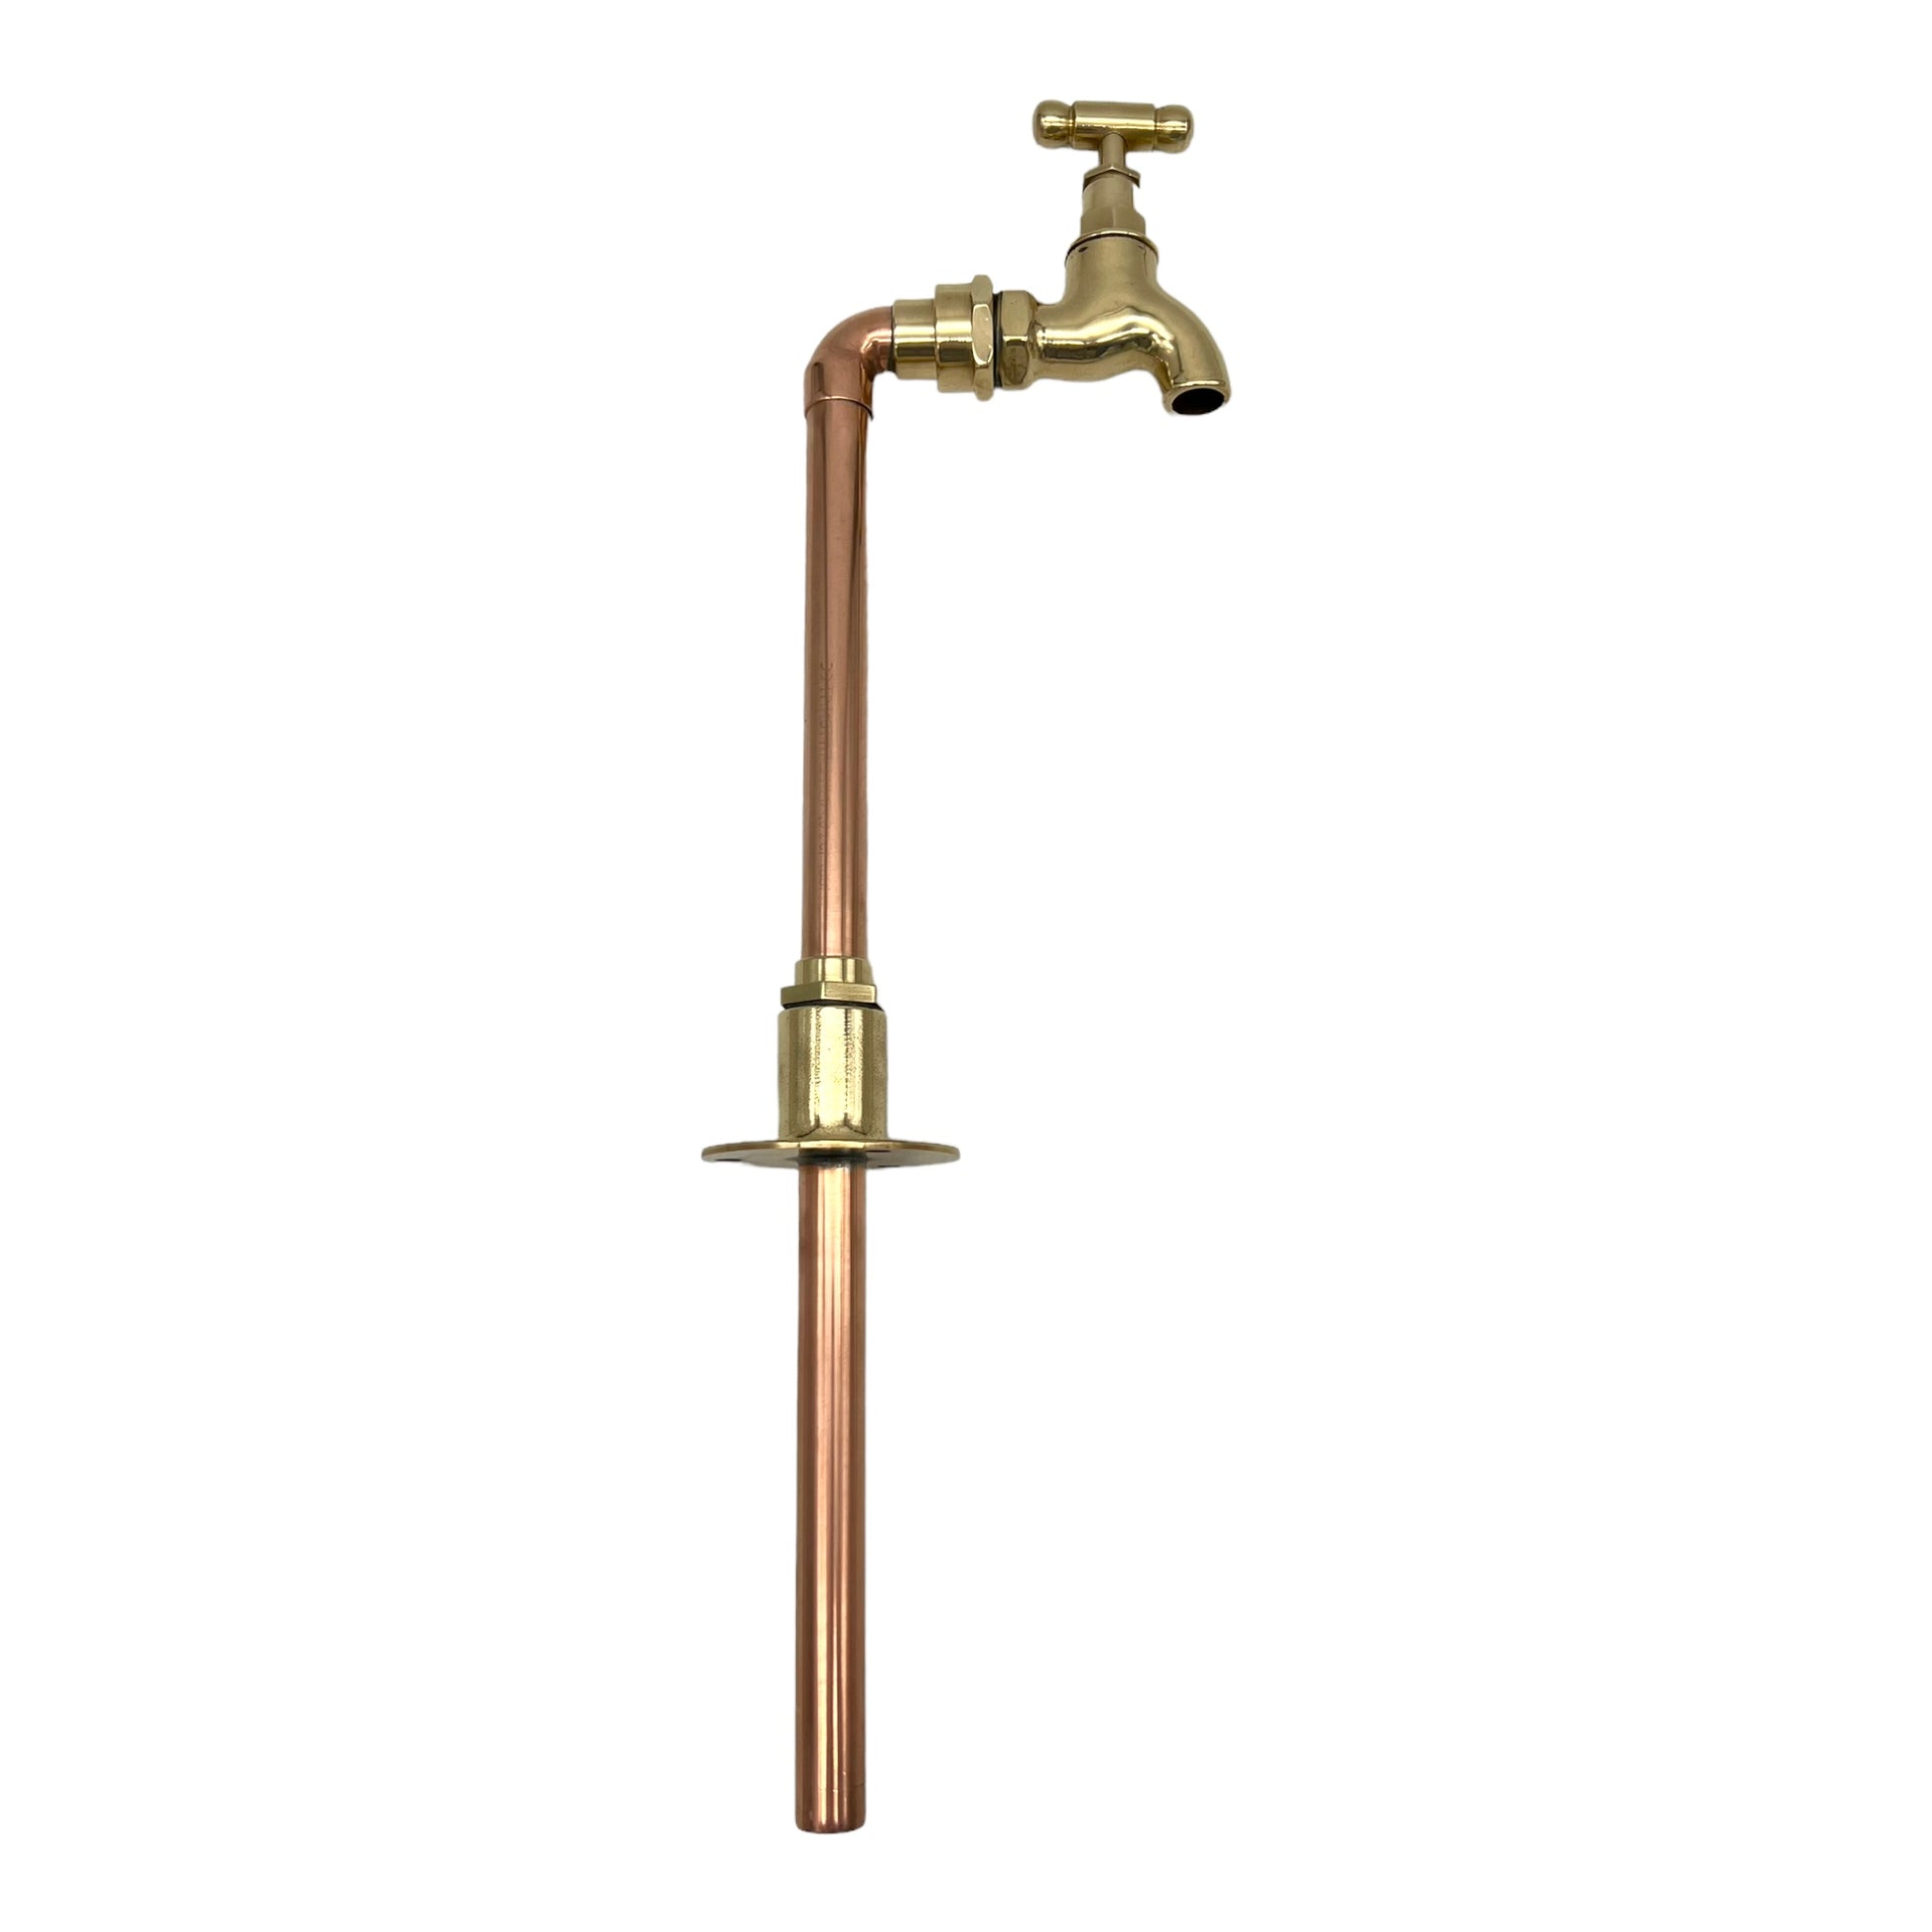 Copper and brass handmade tap sold by All Things French Store